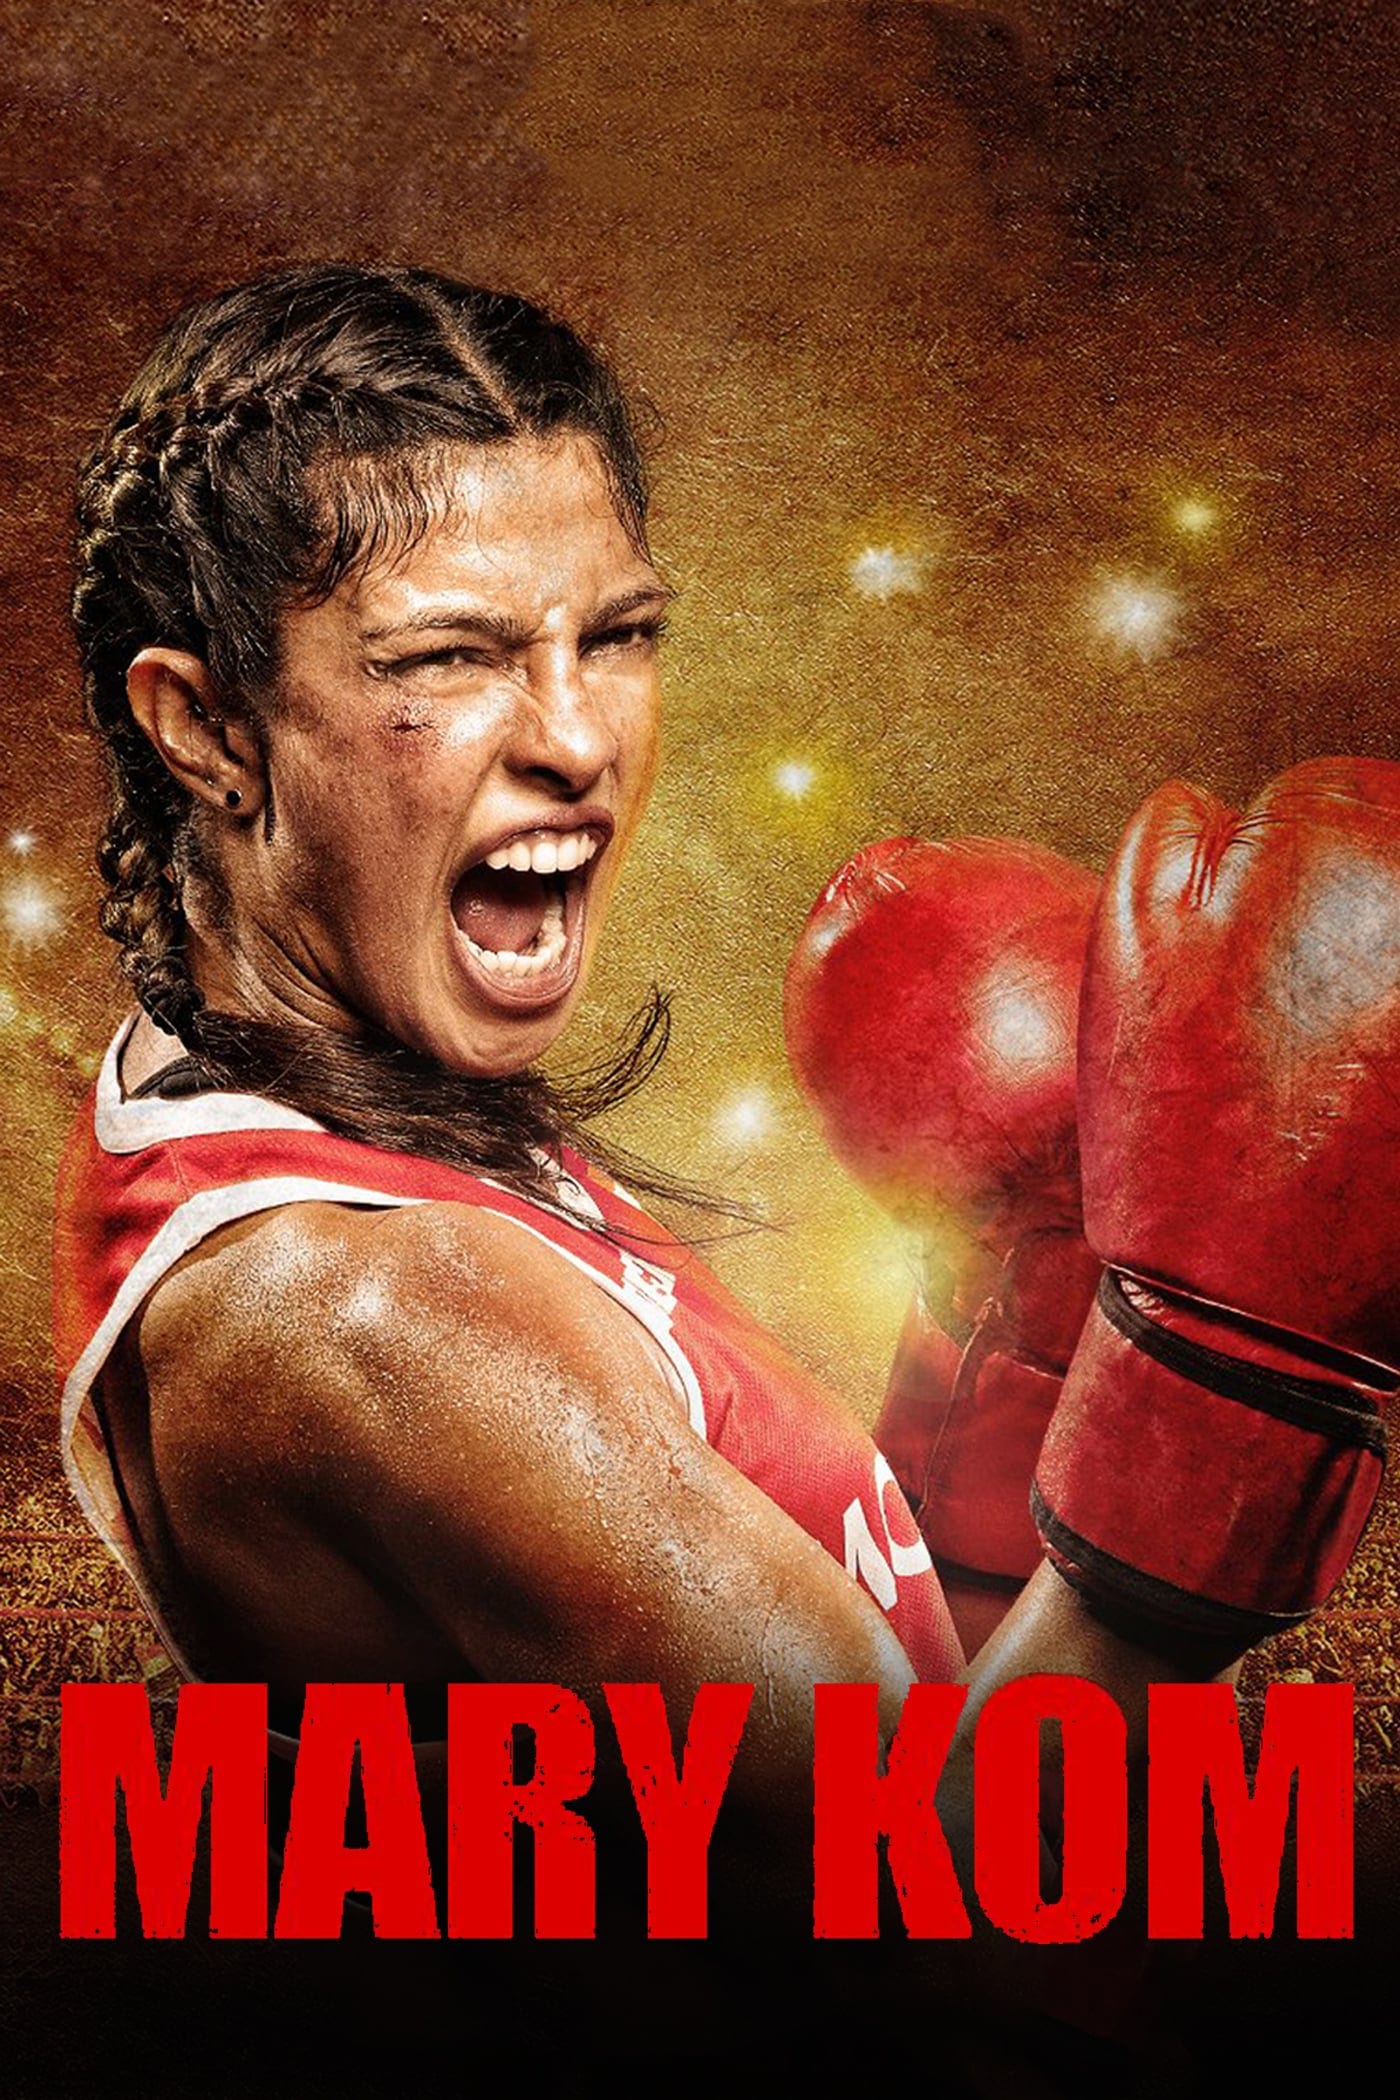 Poster for the movie "Mary Kom"